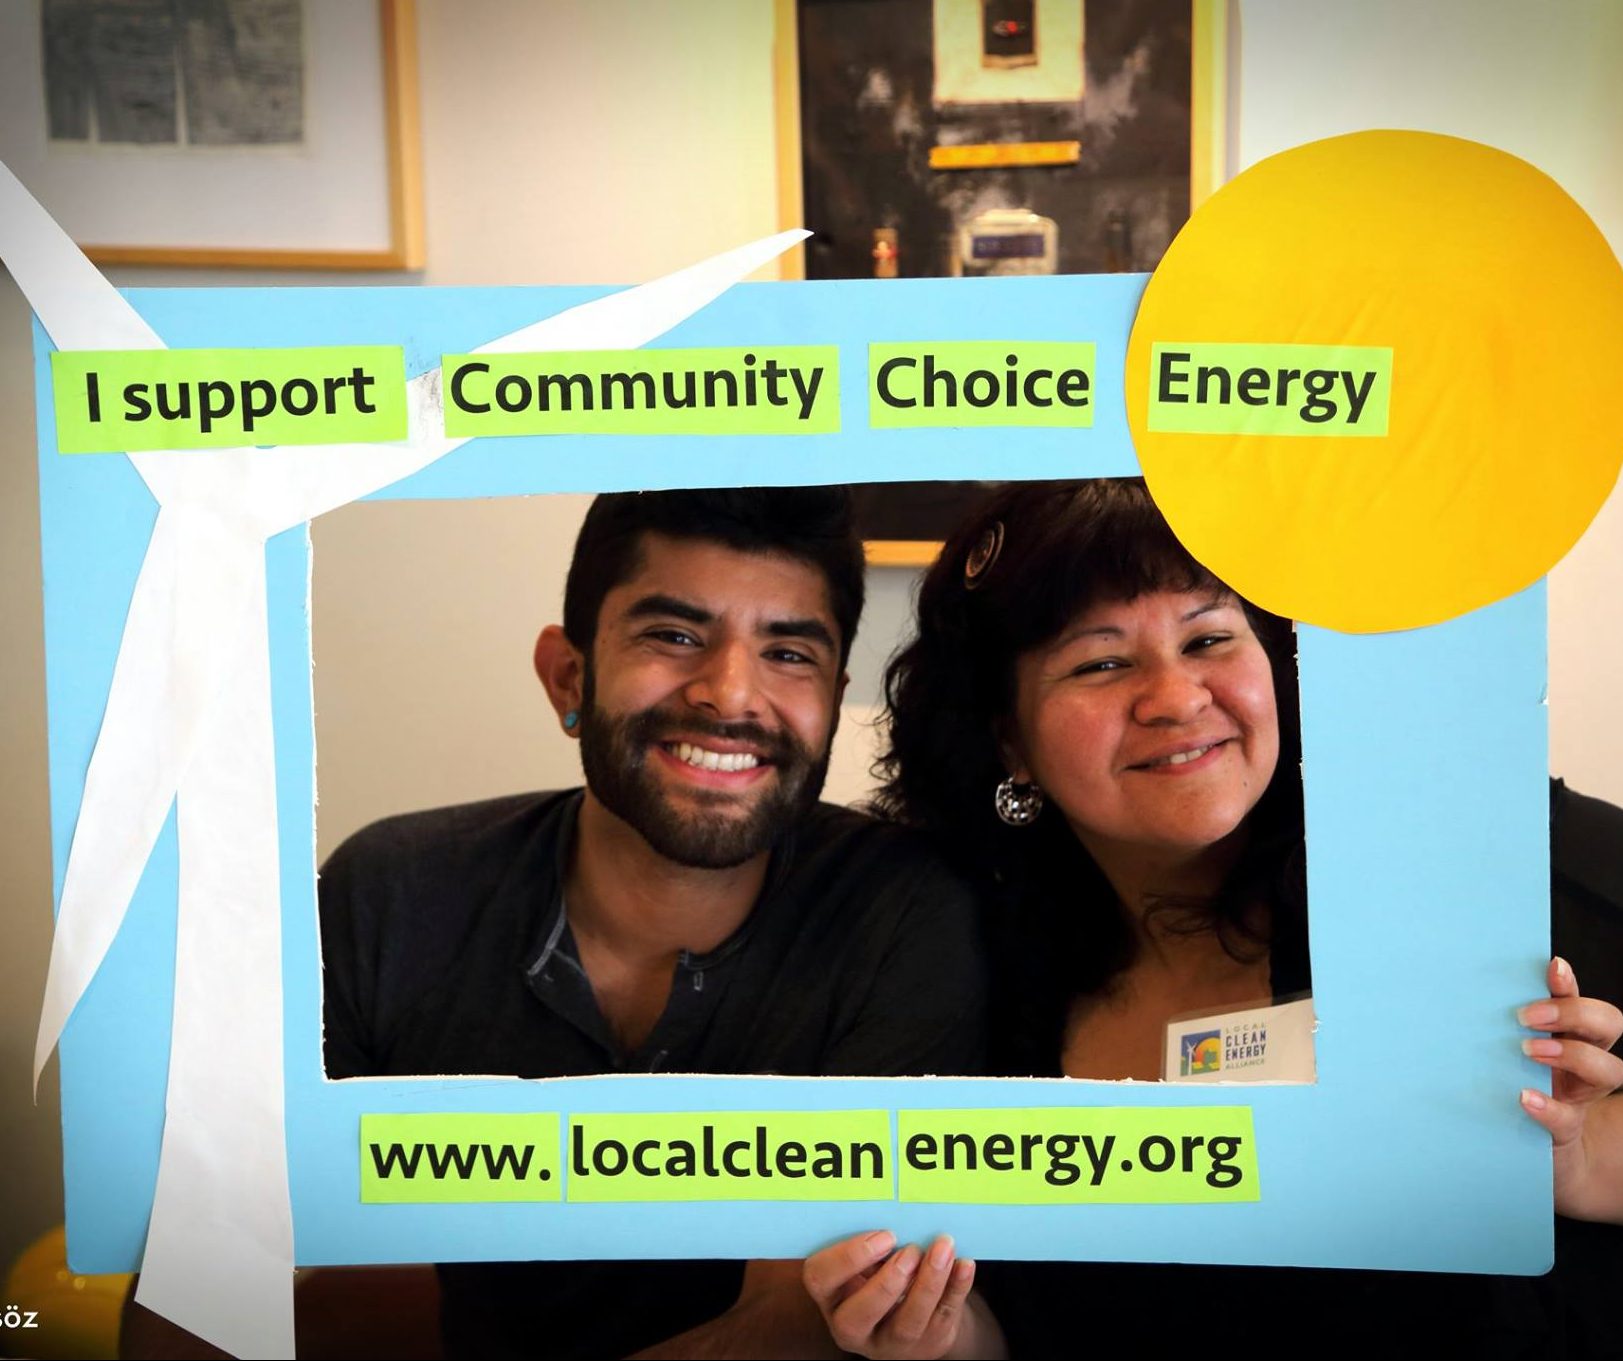 Community Choice Energy: A Pathway to Resilient, Energy-Secure Communities